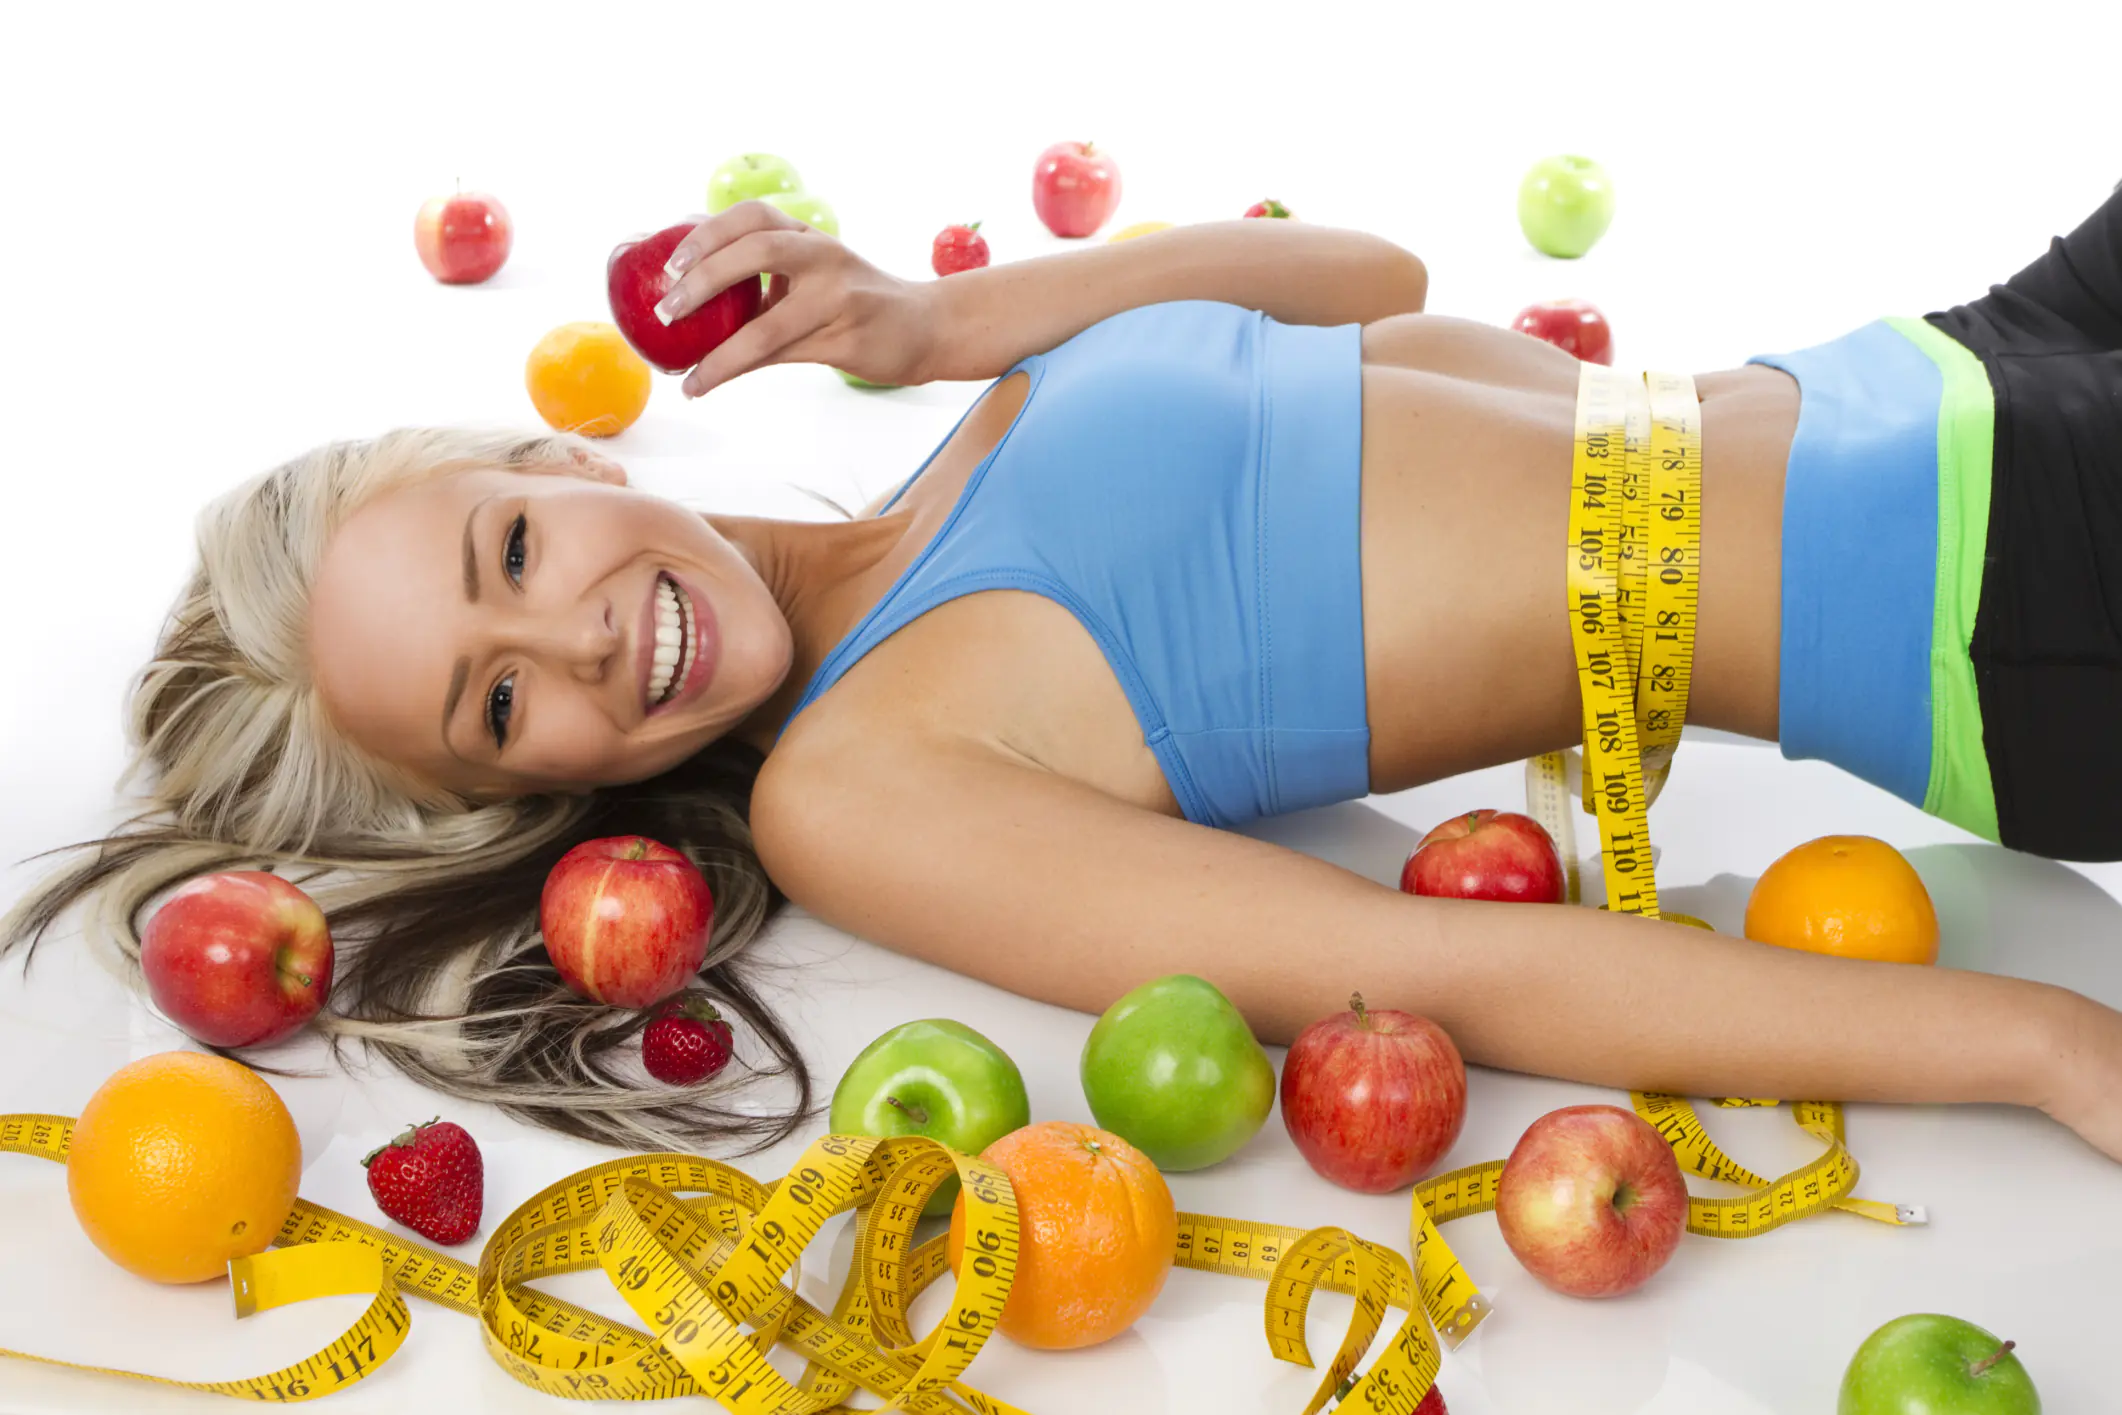 Which weight loss diets give results and are not harmful to health?